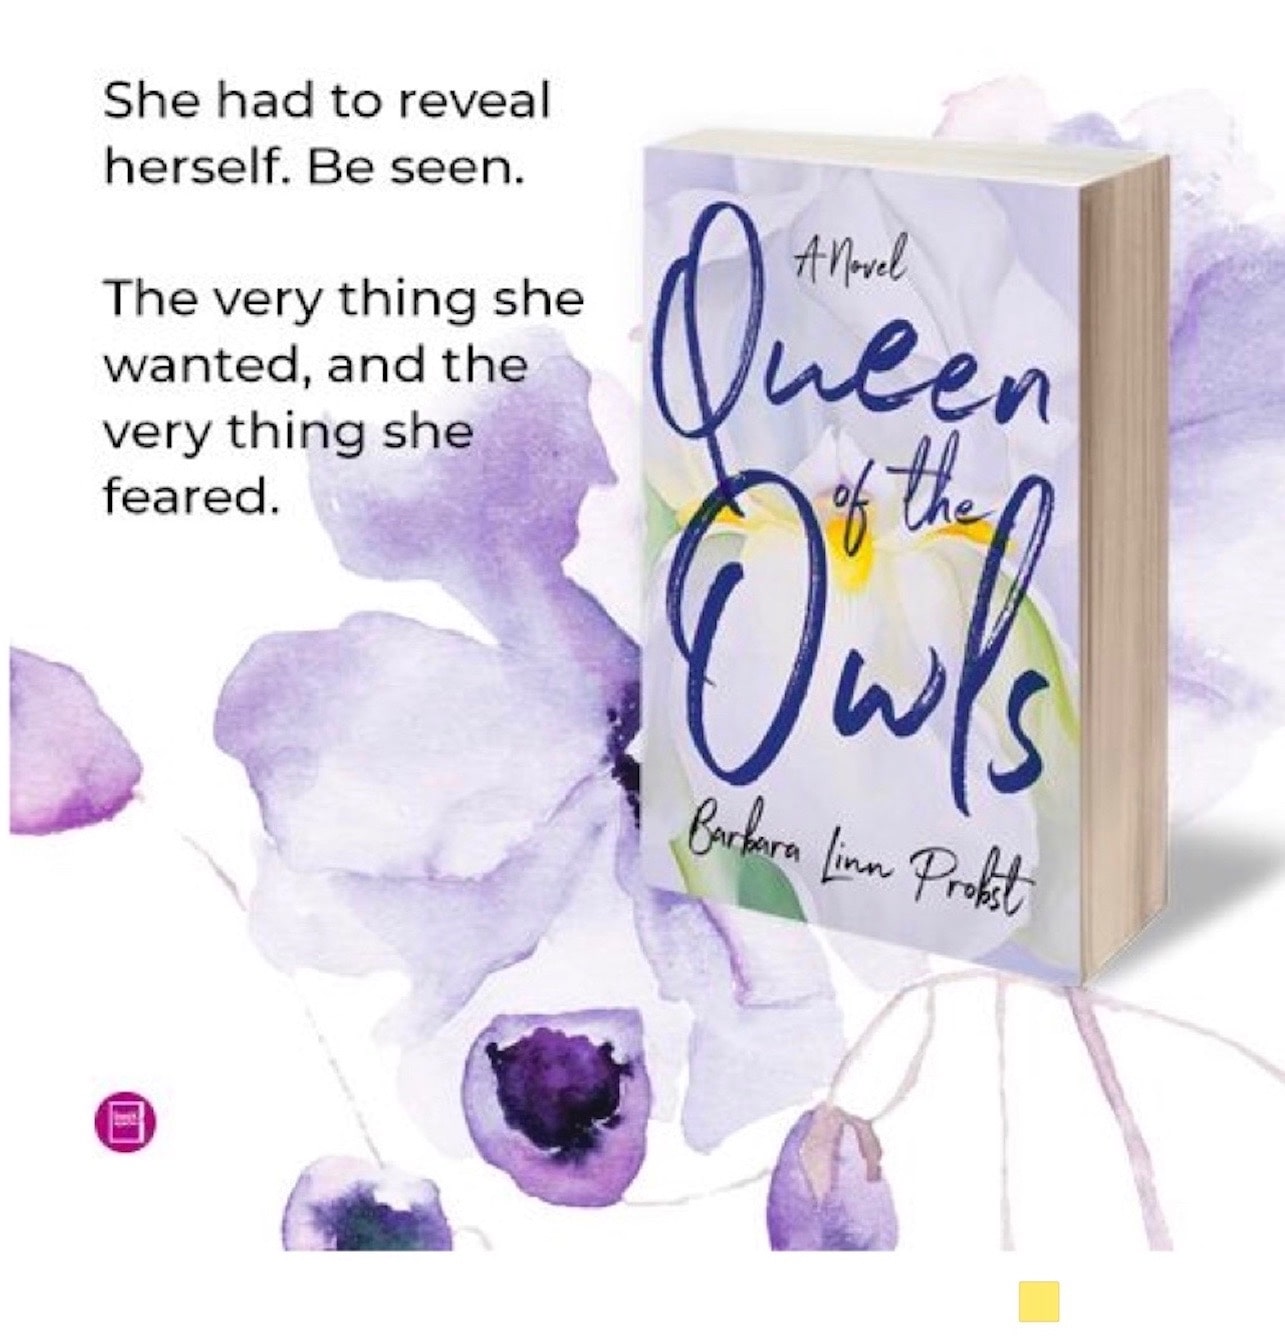 Queen of the Owls: A Novel Book cover